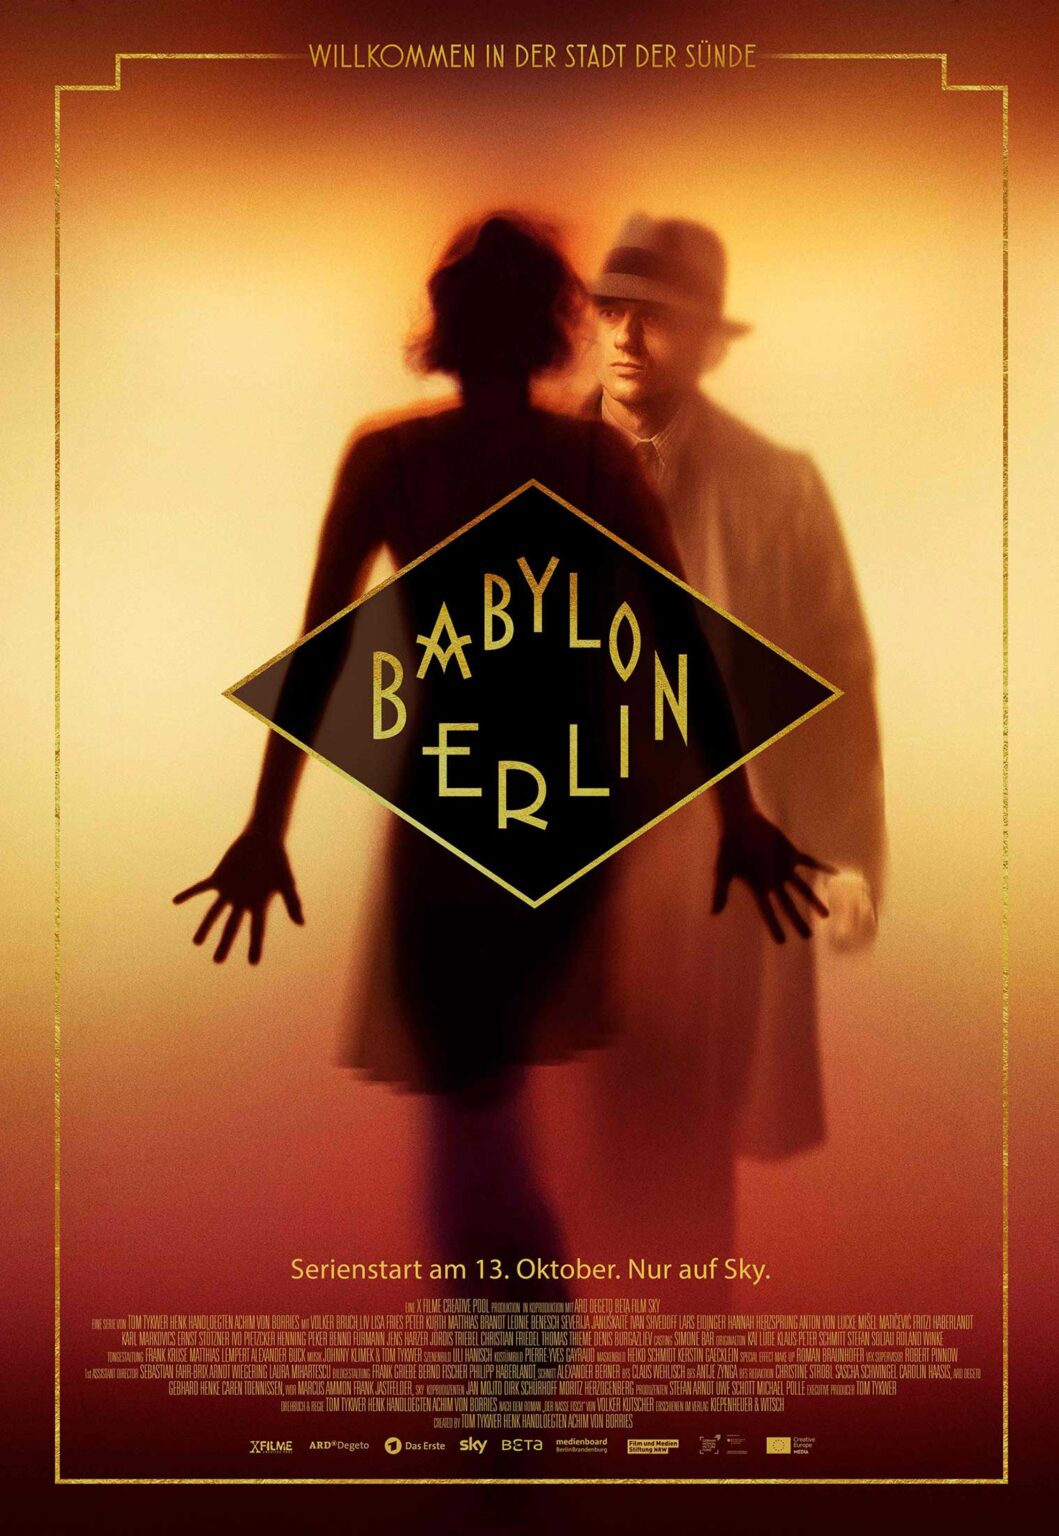 'Babylon Berlin' is a thrilling crime drama set in 1920s Germany. Here's everything you need to know about the noir drama on Netflix.